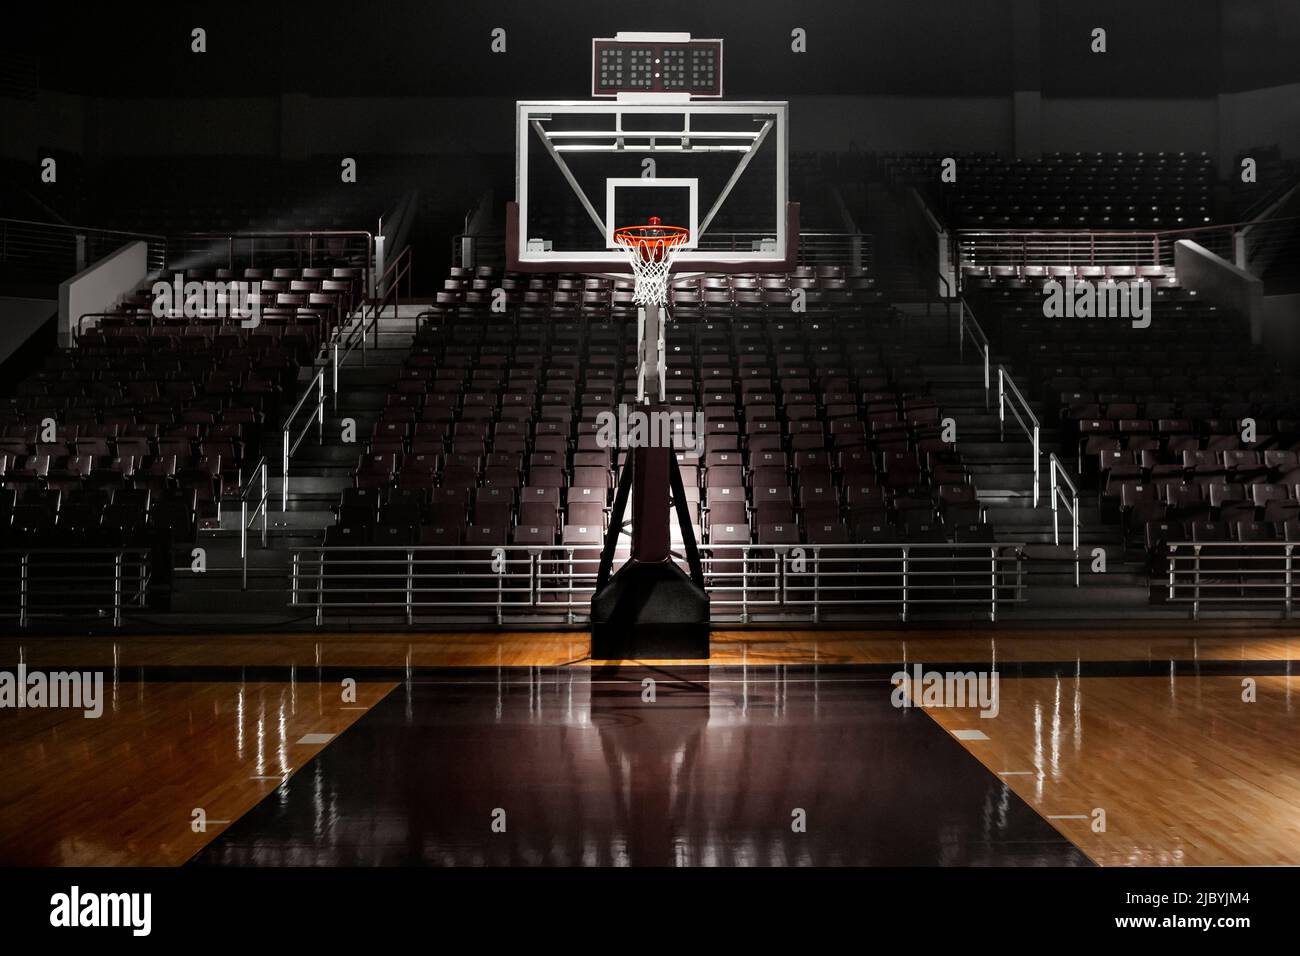 Empty basketball arena with dramatic lighting, view from free throw line in front of goal on the court Stock Photo